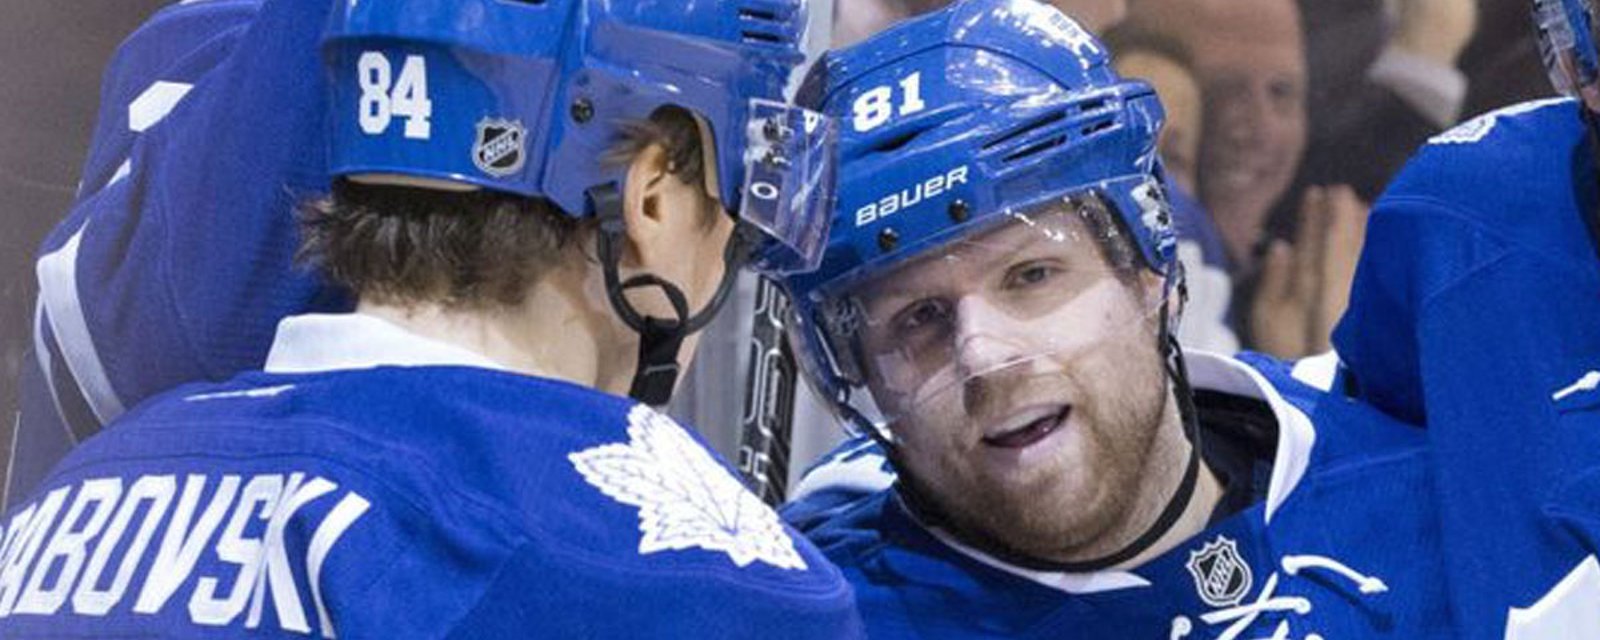 Grabovski hustled Kessel to get money out of him when they were teammates in Toronto! 